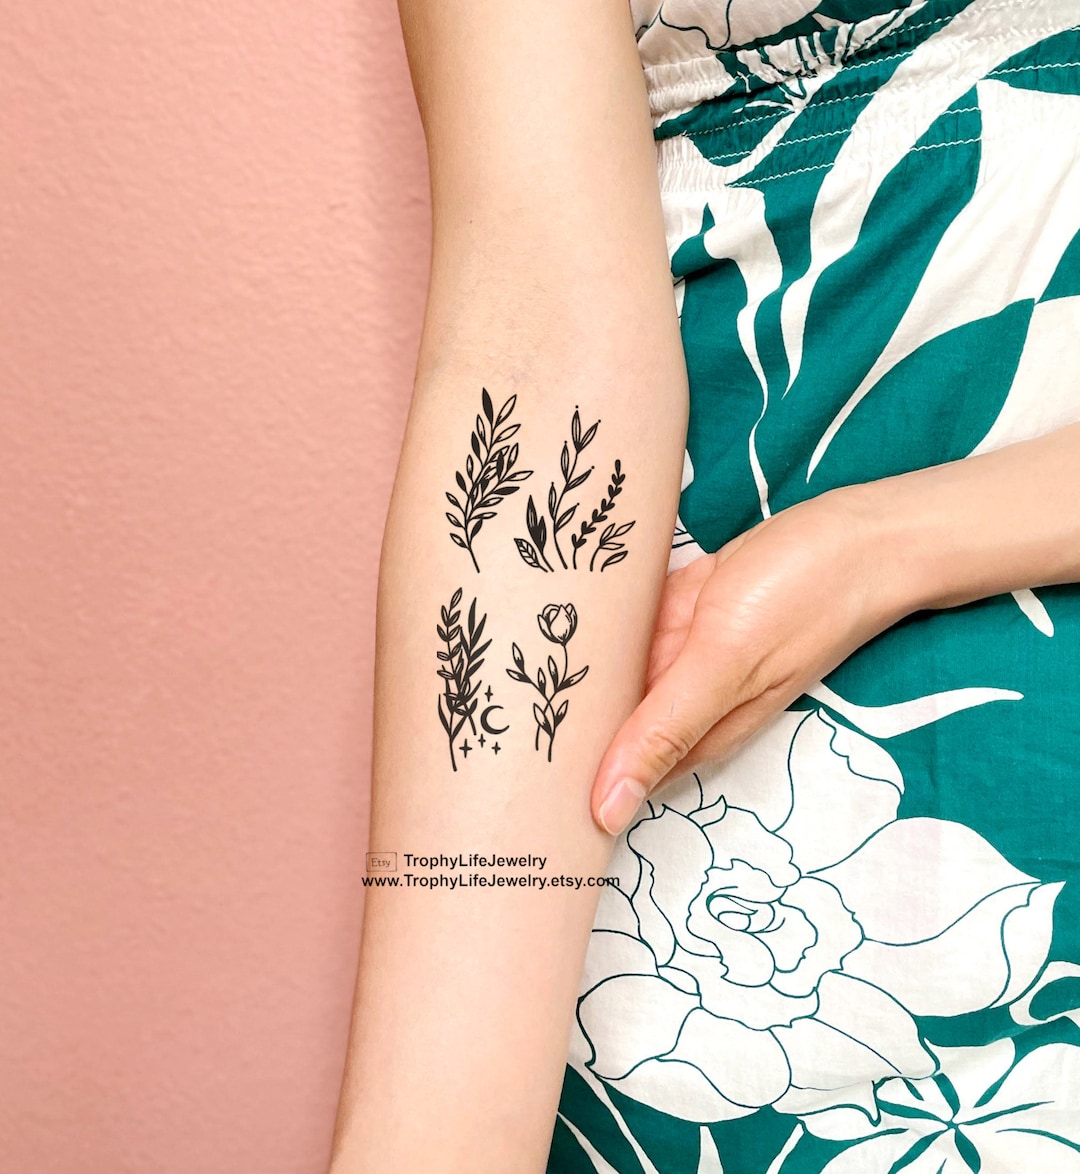 komstec Buddha With Lotus Tattoo Temporary Tattoo For Male And Female Tattoo  - Price in India, Buy komstec Buddha With Lotus Tattoo Temporary Tattoo For  Male And Female Tattoo Online In India,